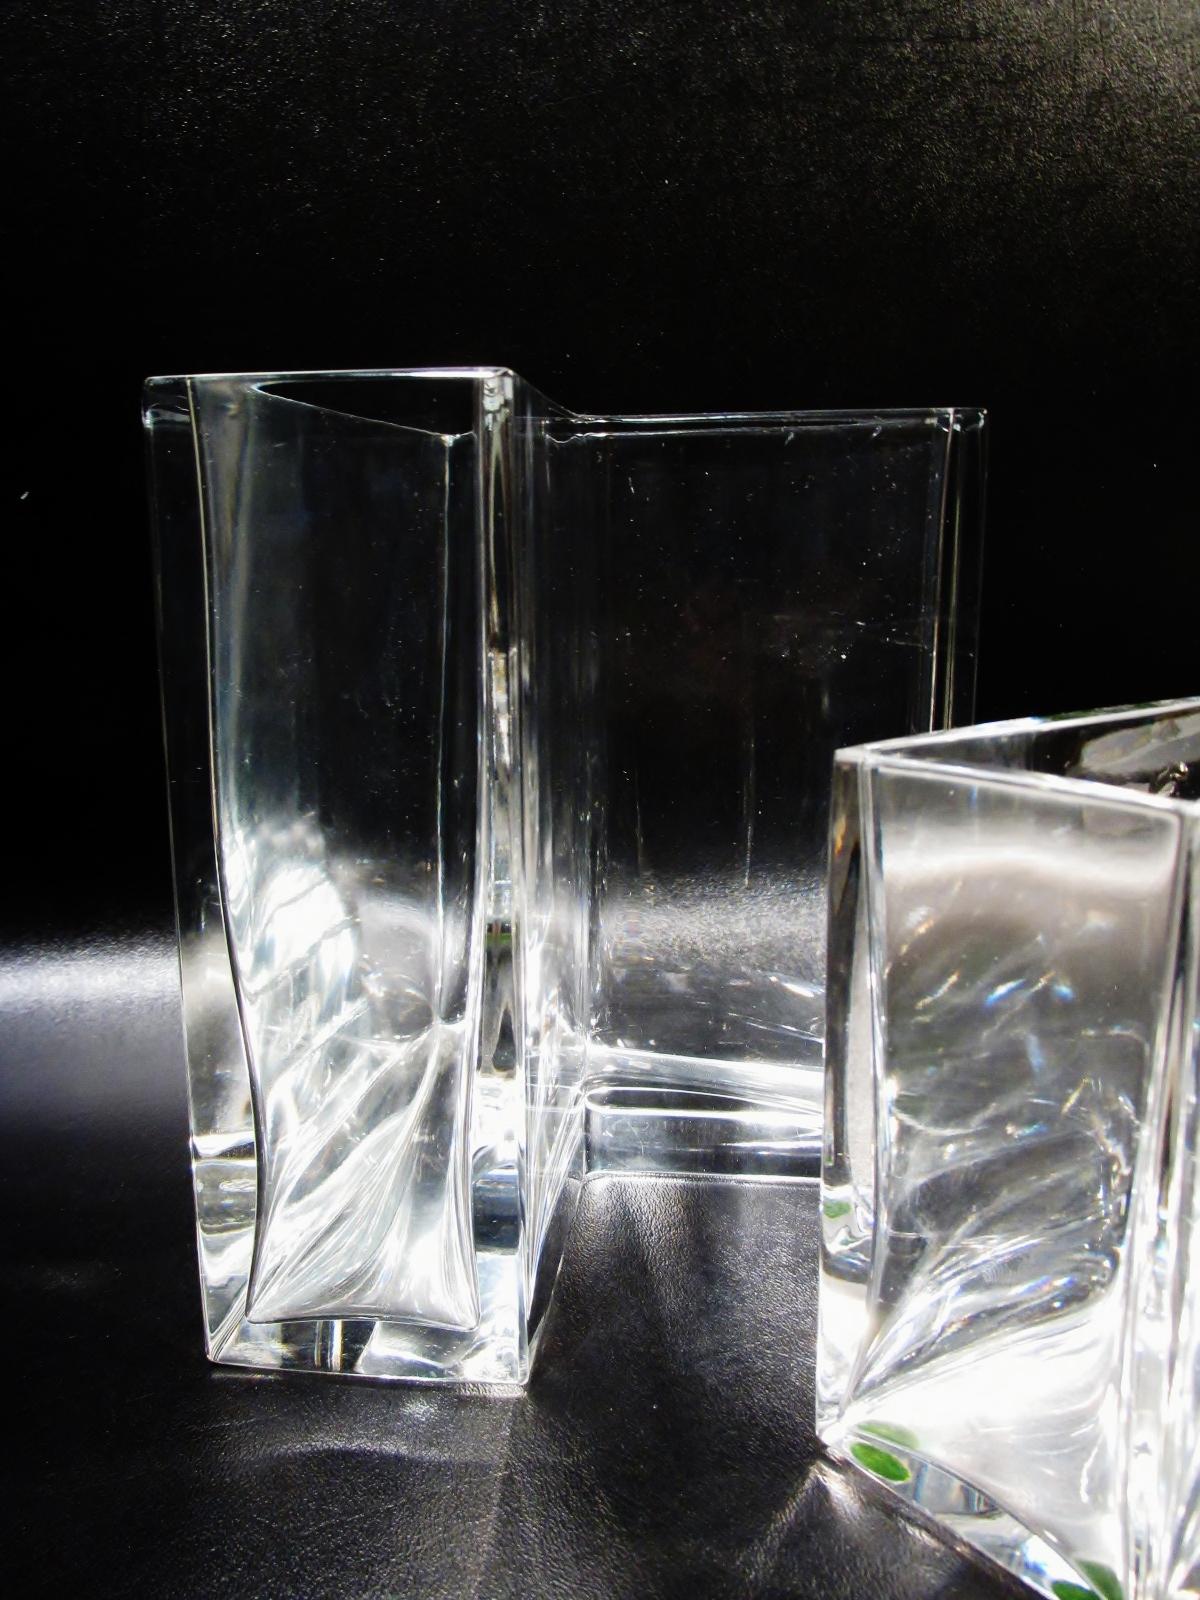 Rarely seen pair of Baccarat fine crystal Angolari vases. Also called the angular vases, these were designed in 1978, came in several heights, by Roberto Sambonet. Heavy in the hand and made in France. Both are 5 7/8” along sides, shorter is 7.75”